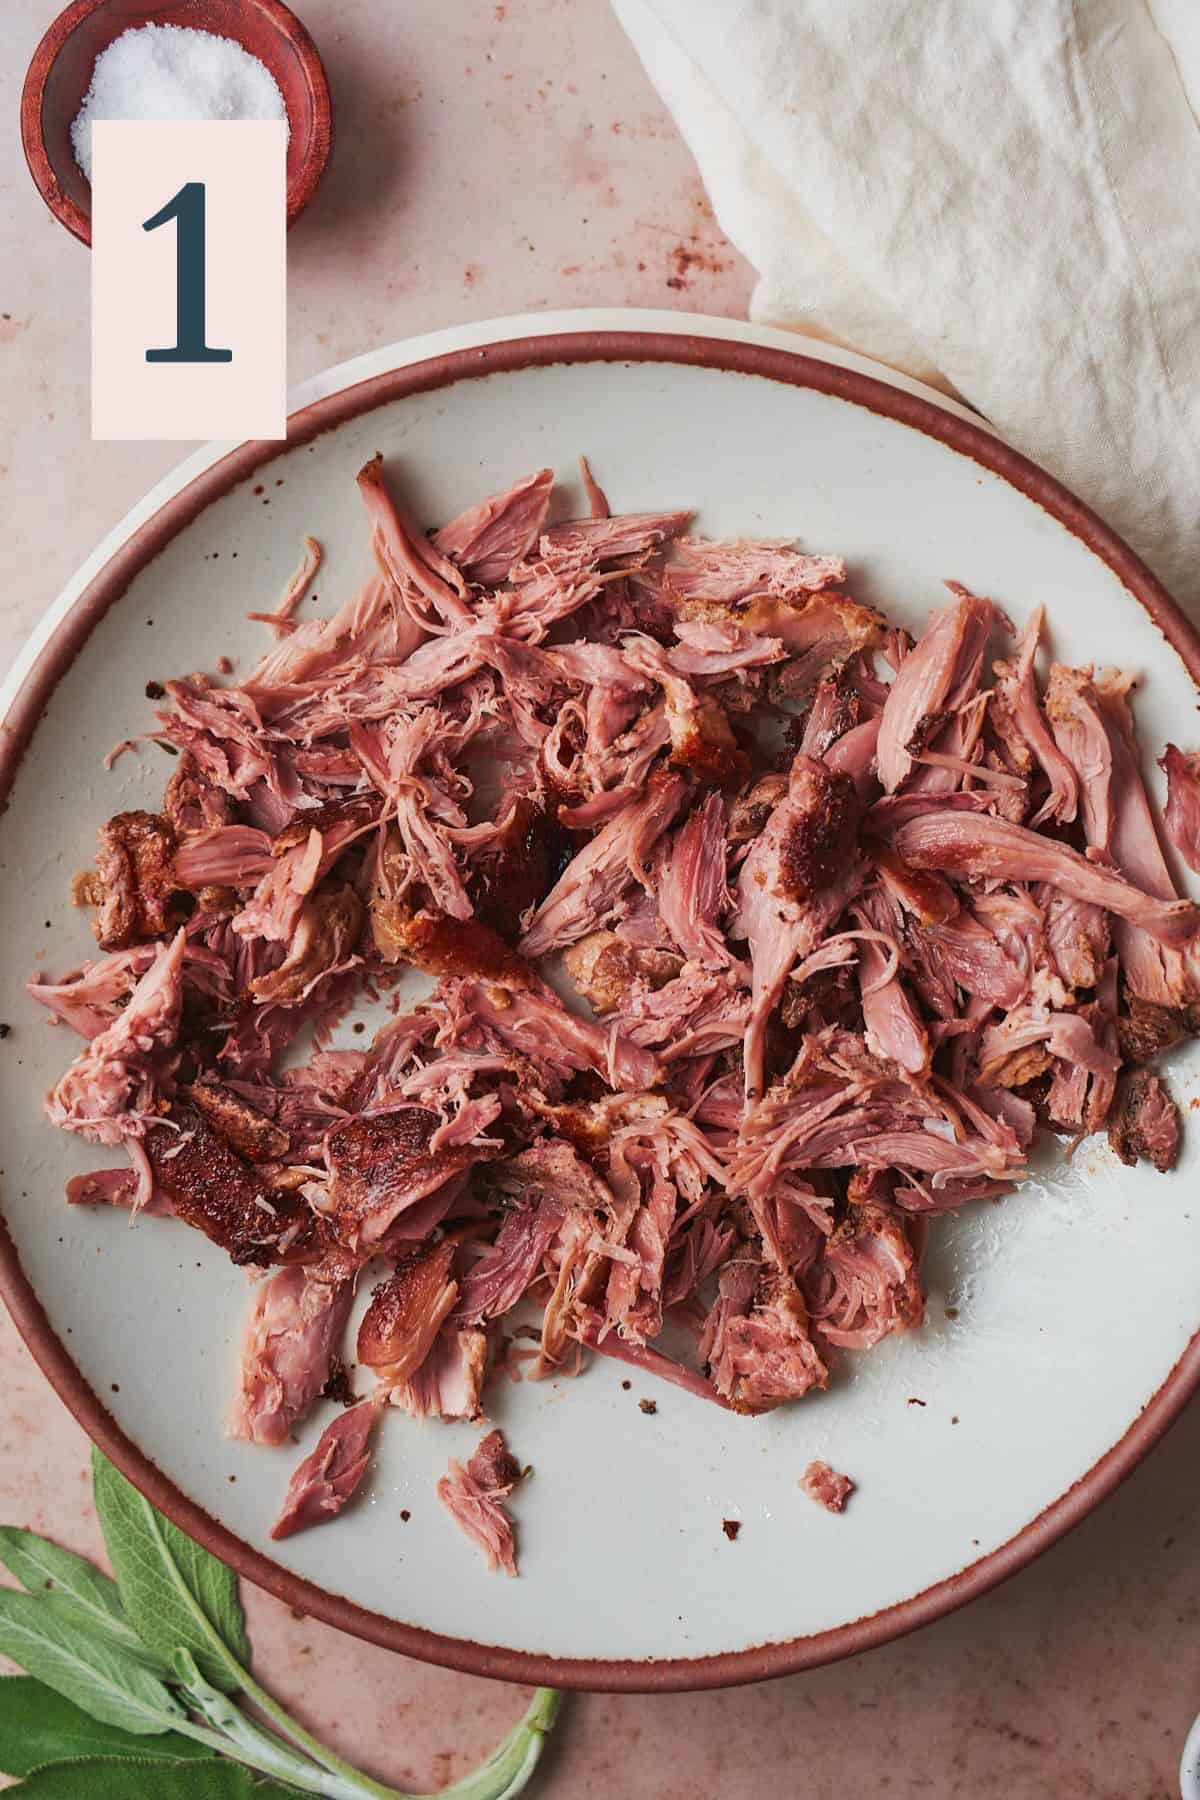 Shredded and cooked duck meat on a plate. 